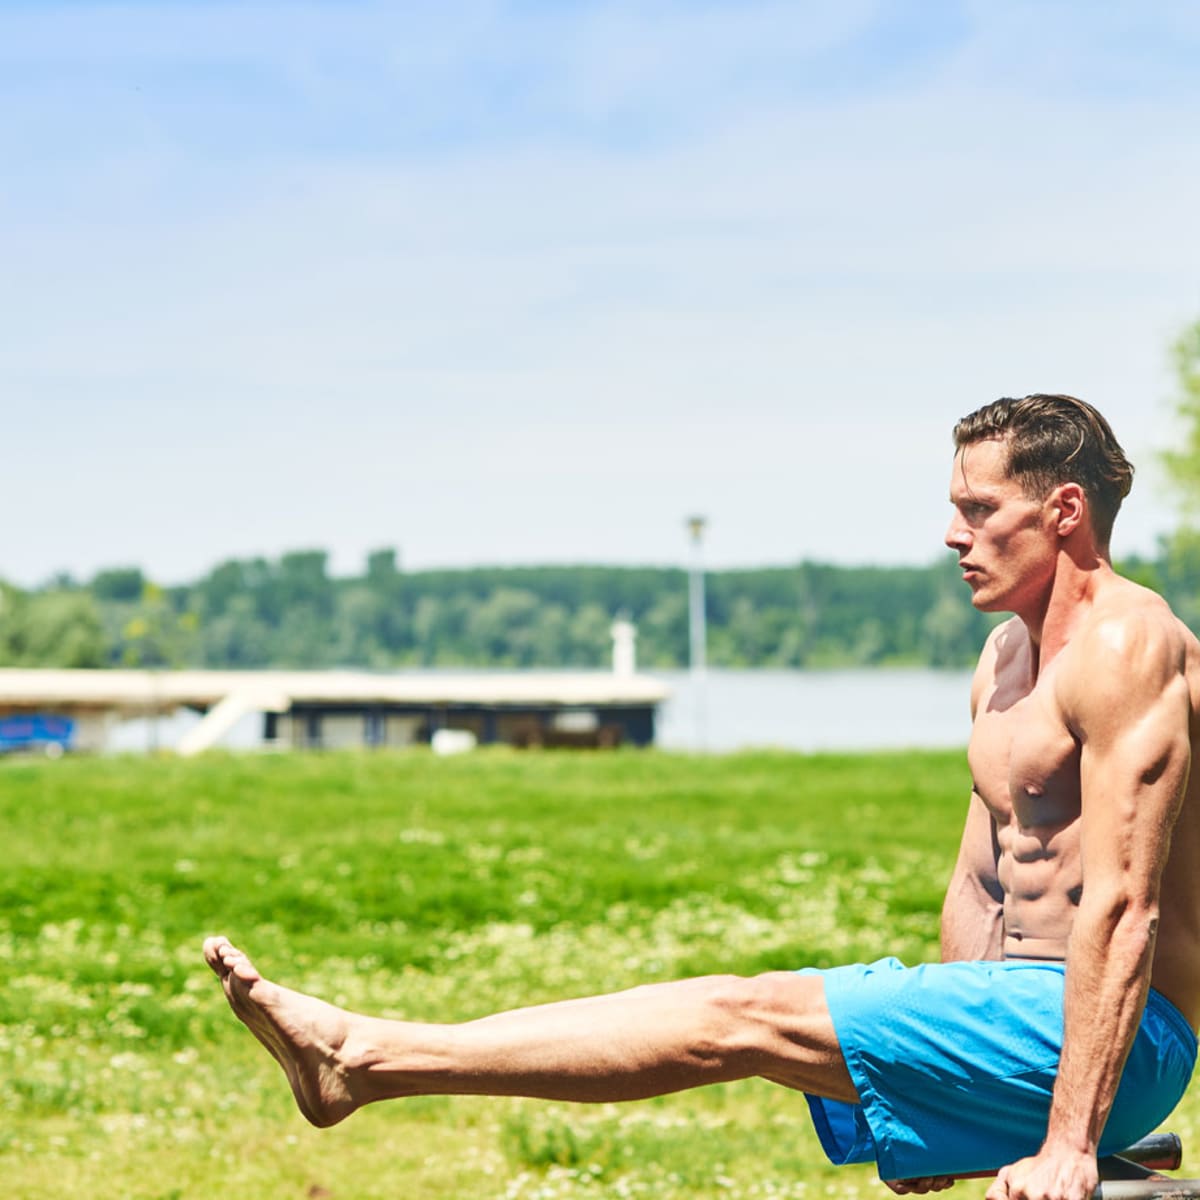 How to Plan an Outdoor Fitness Park